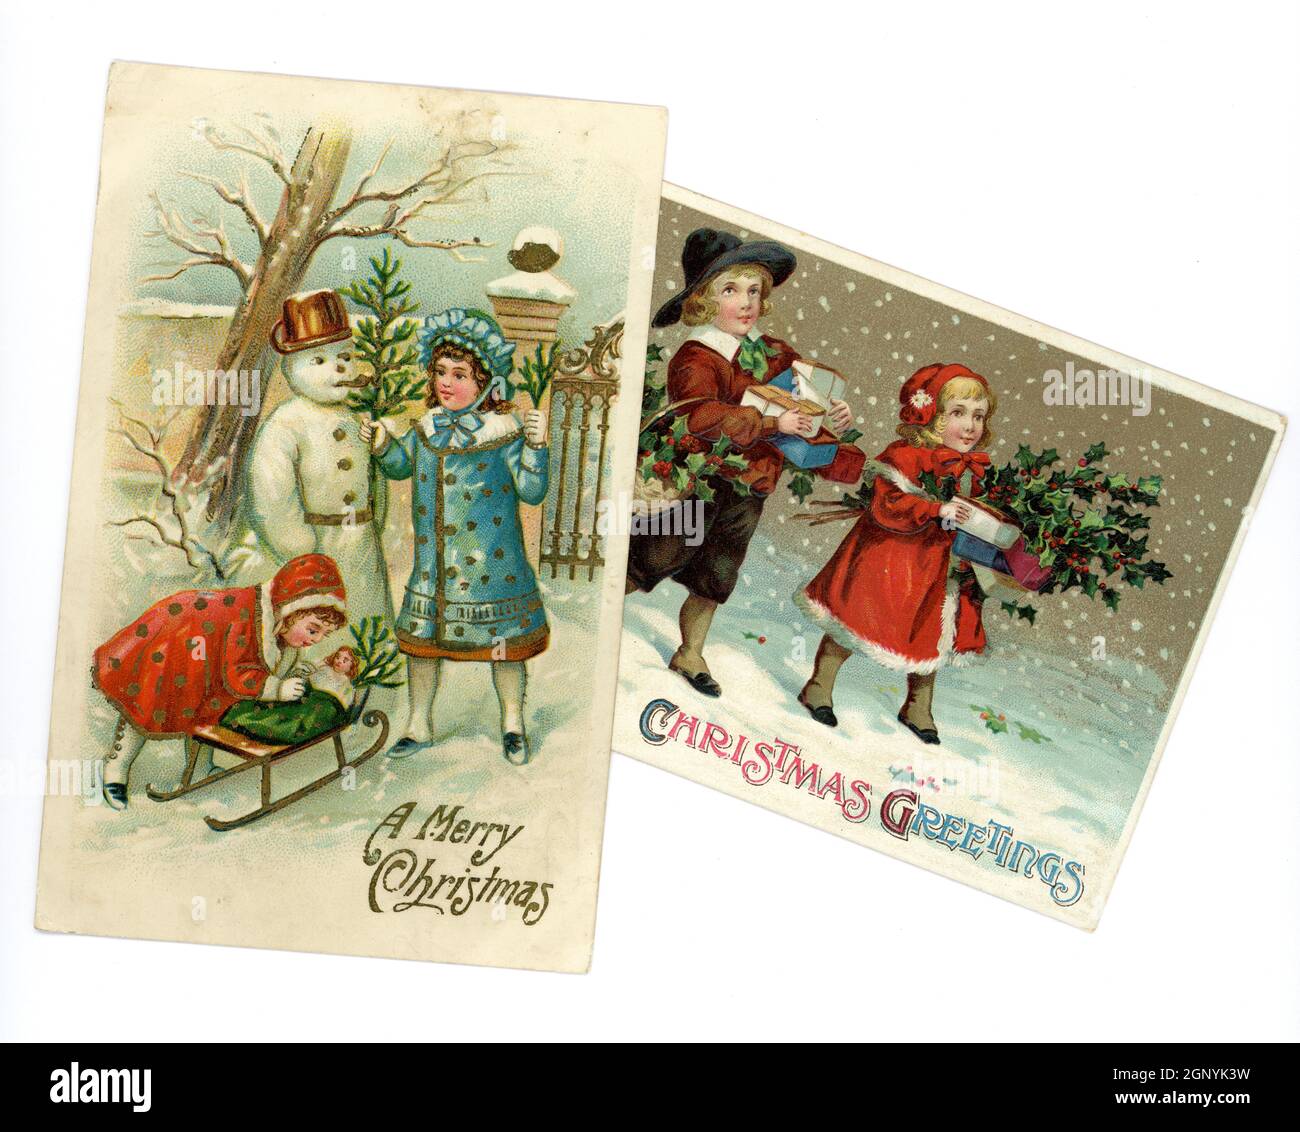 Original embossed Edwardian era Christmas greetings postcards printed in Germany, of cute young children wearing winter clothes fashionable at this time, building a snowman and bearing gifts, circa 1910, U.K. Stock Photo